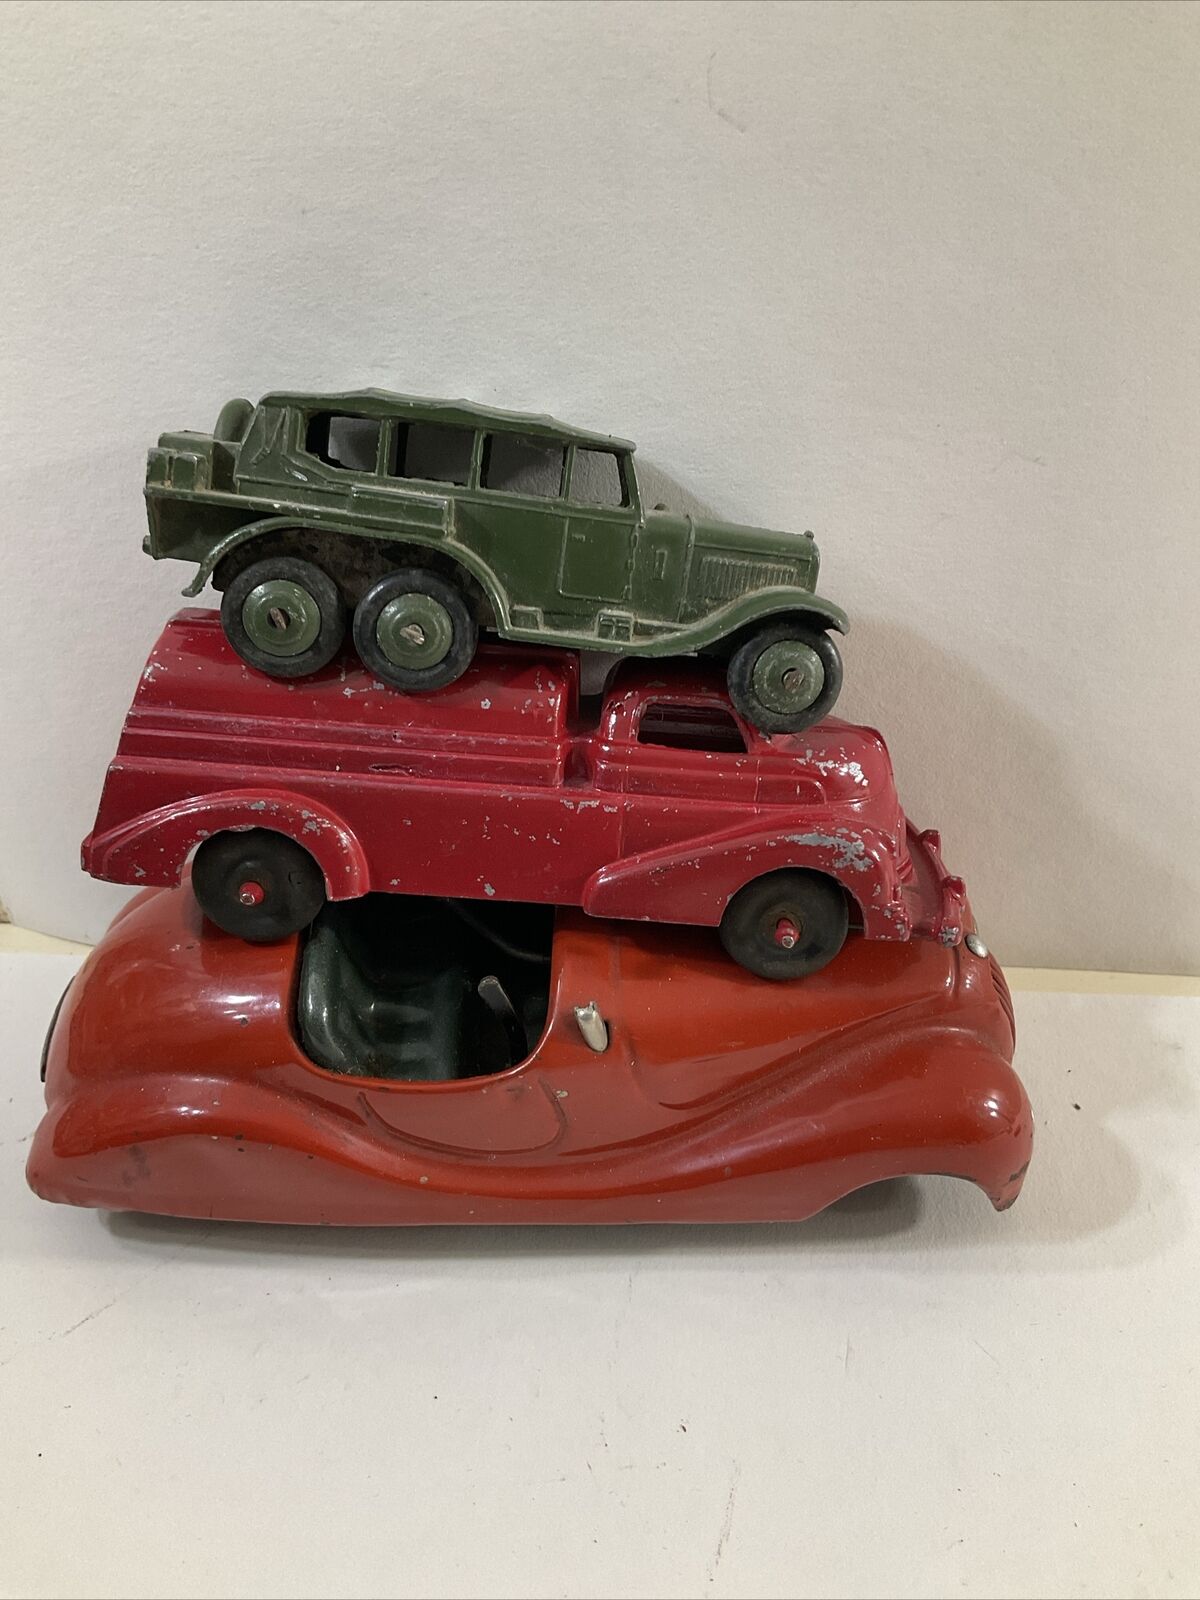 Schuco Examico 4001. Man oil 710, Dinky Toys. Old Toy Cars